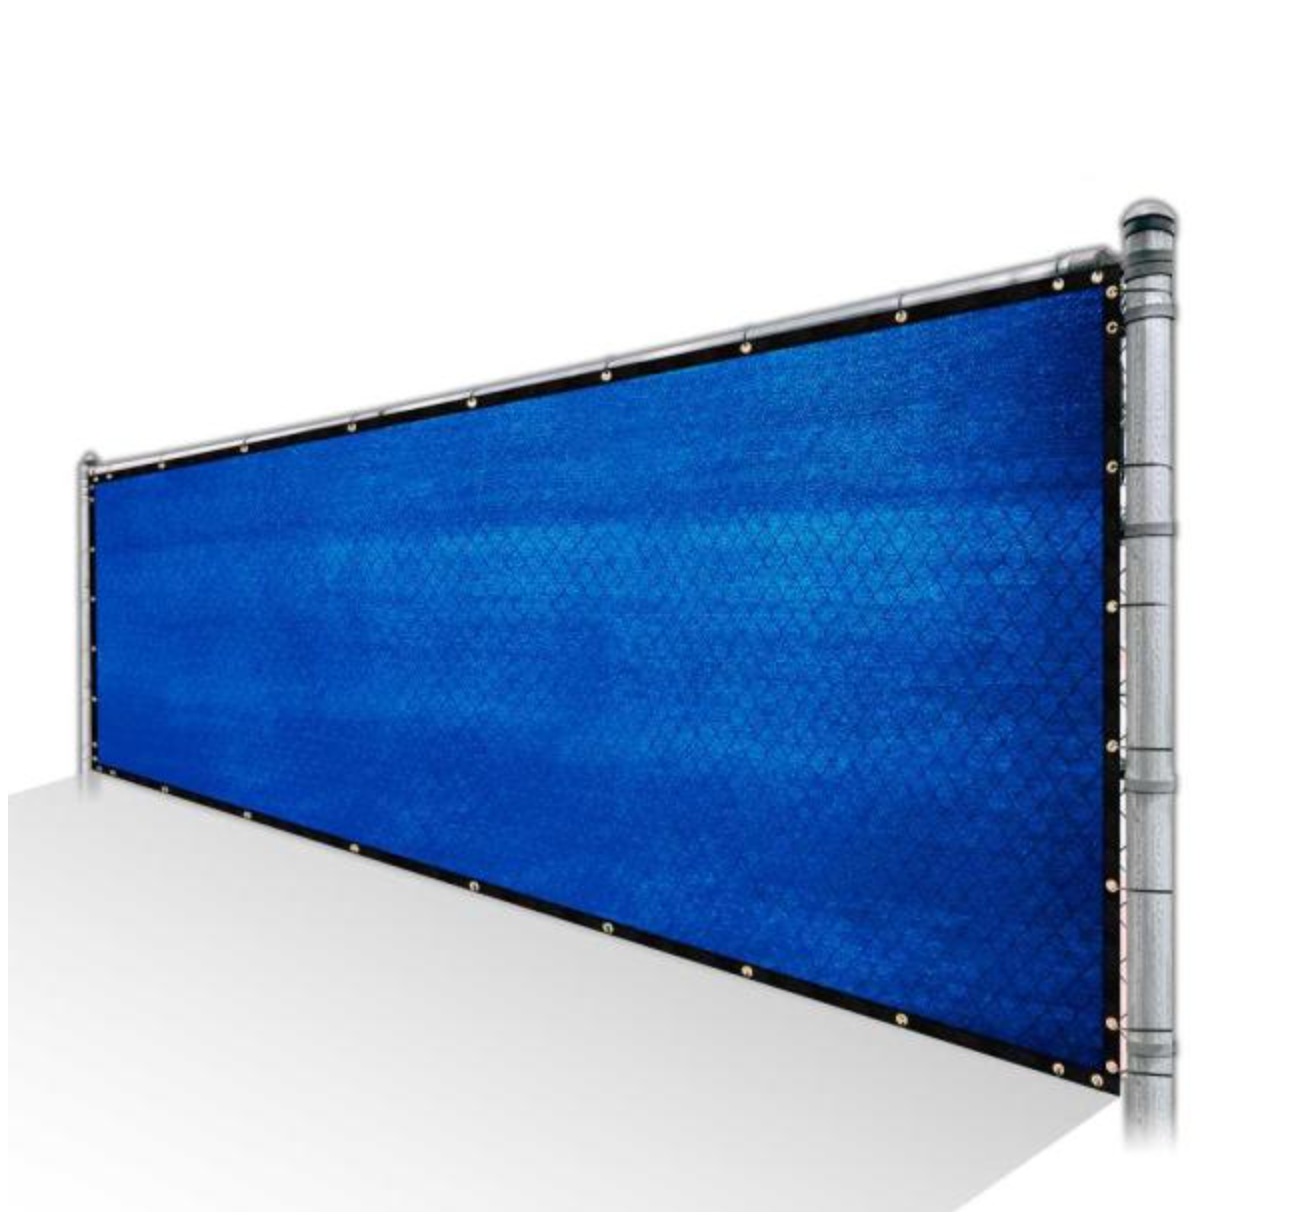 Privacy Fence Screen 85% Shade - Blue Mesh Fabric